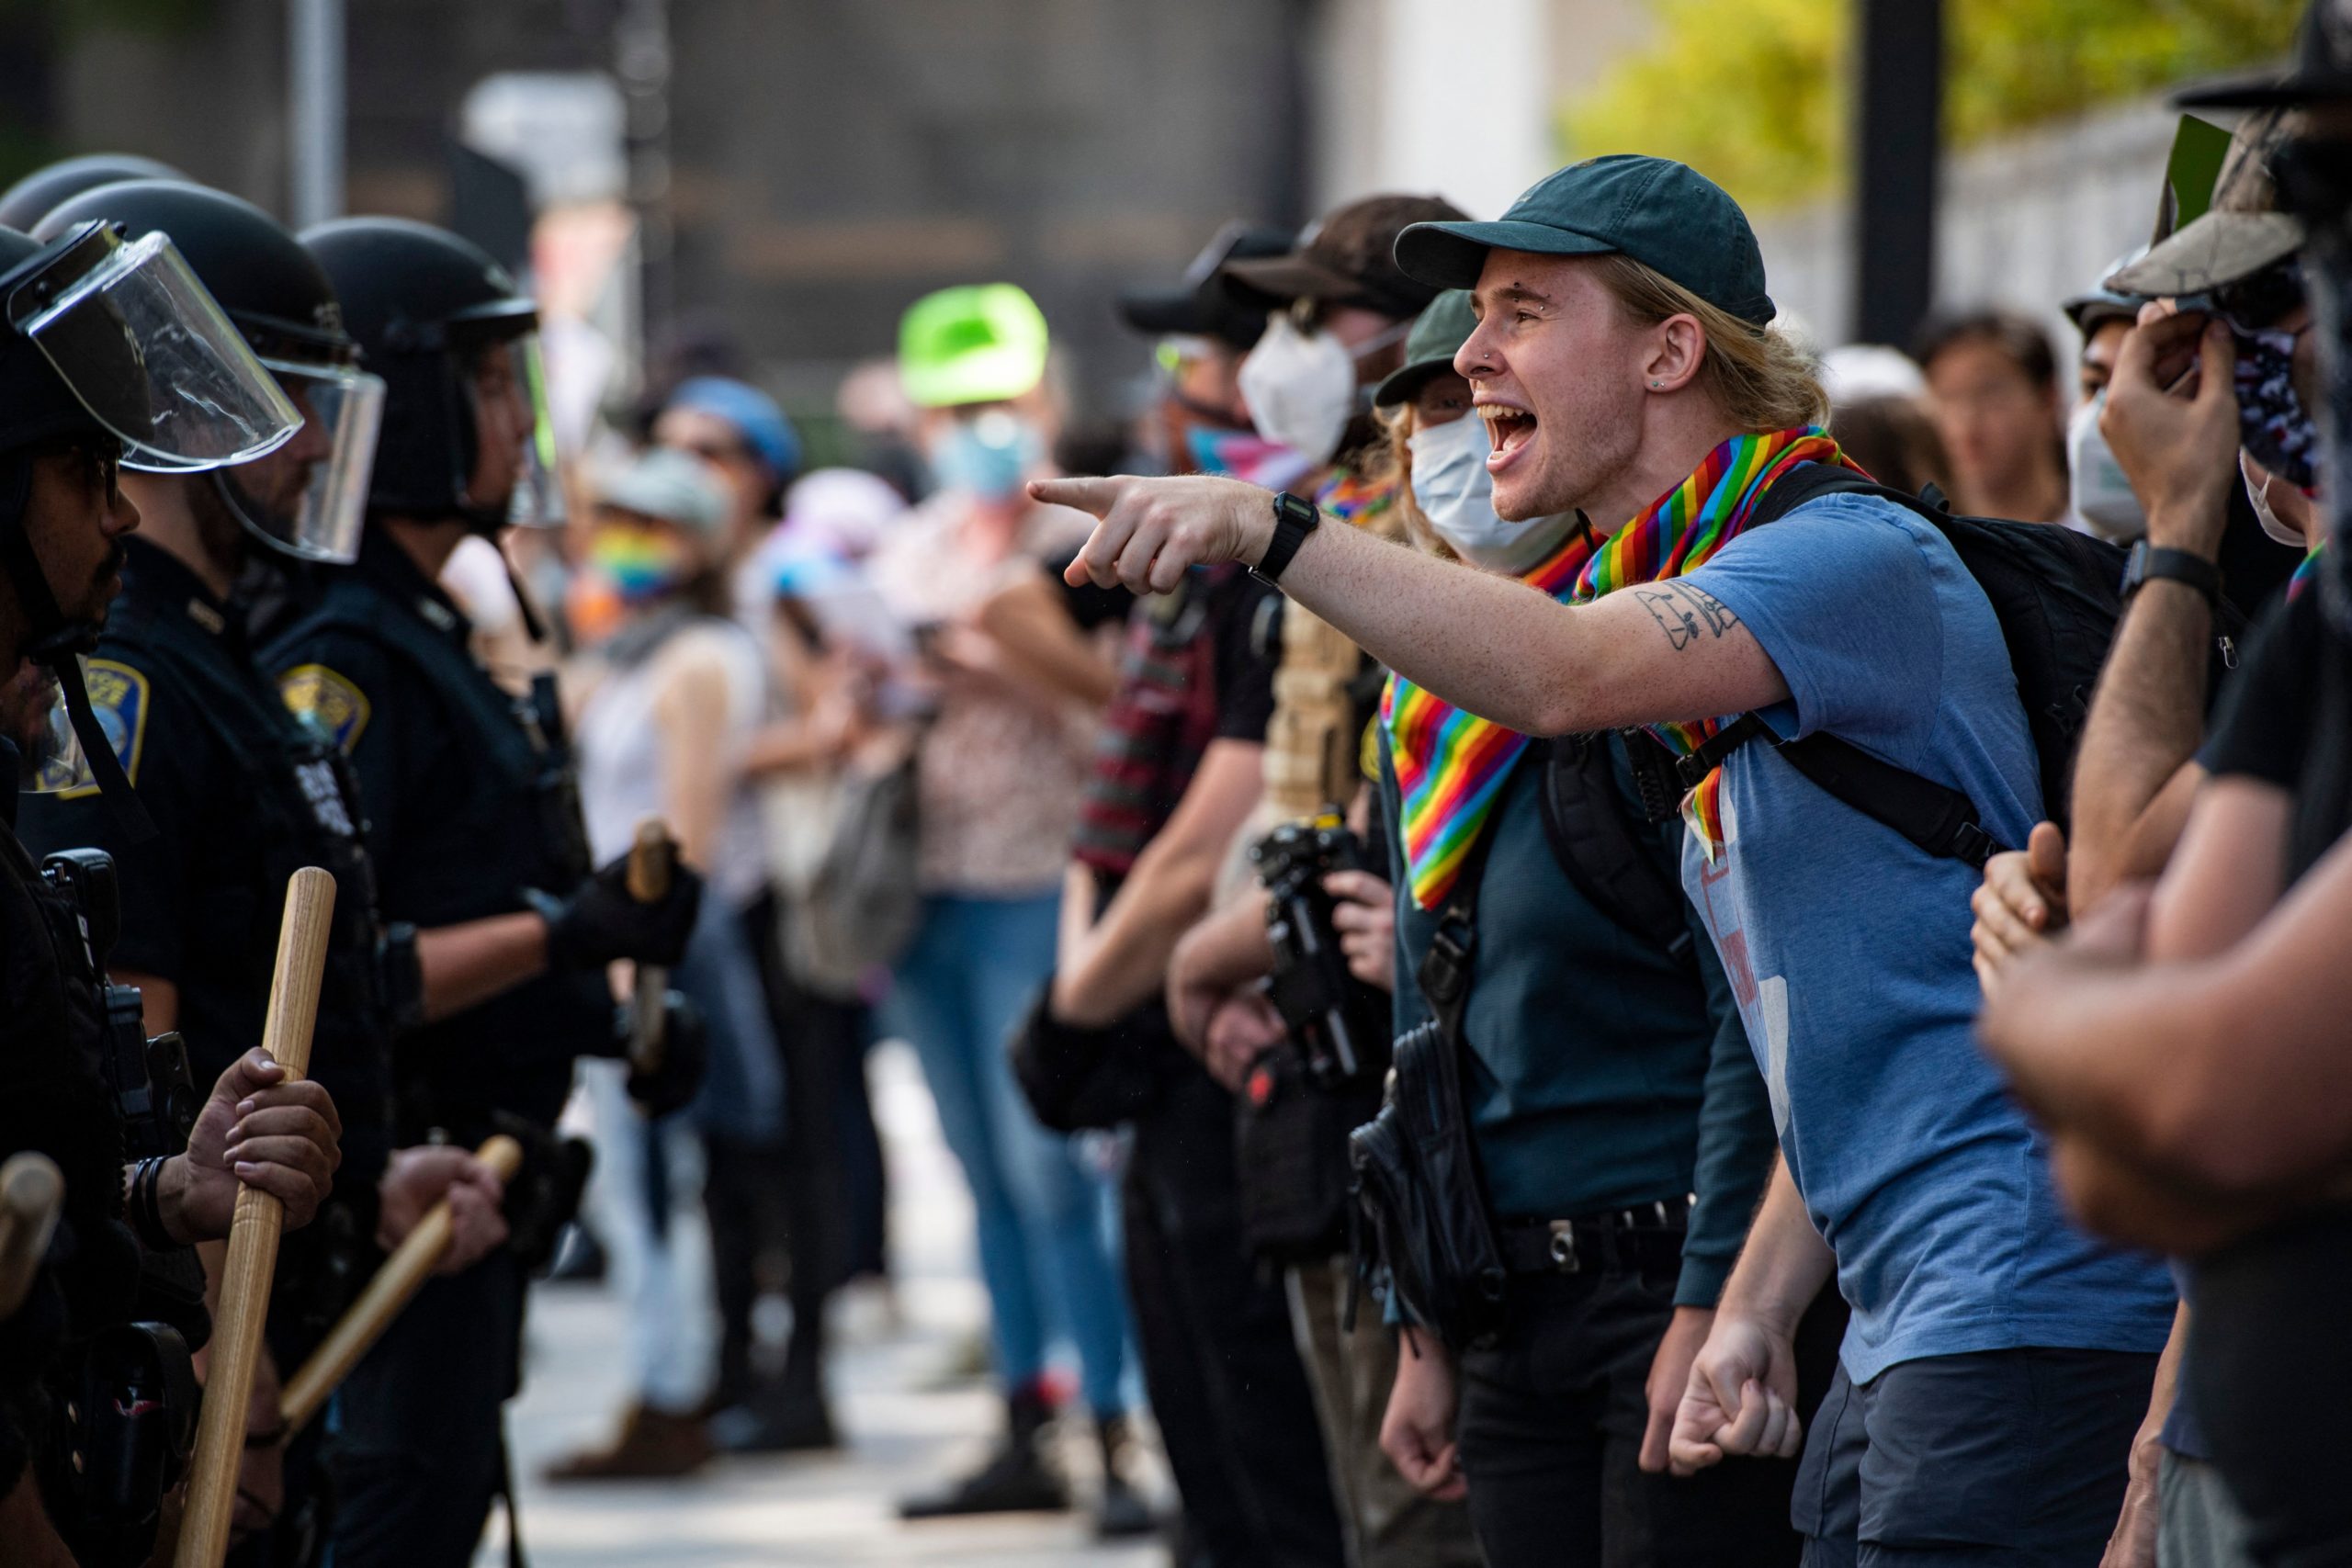 Police form a line in front of demonstrators looking to confront activist Chris Elston outside of Boston Childrens Hospital in Boston, Massachusetts, on September 18, 2022. JOSEPH PREZIOSO/AFP via Getty Images